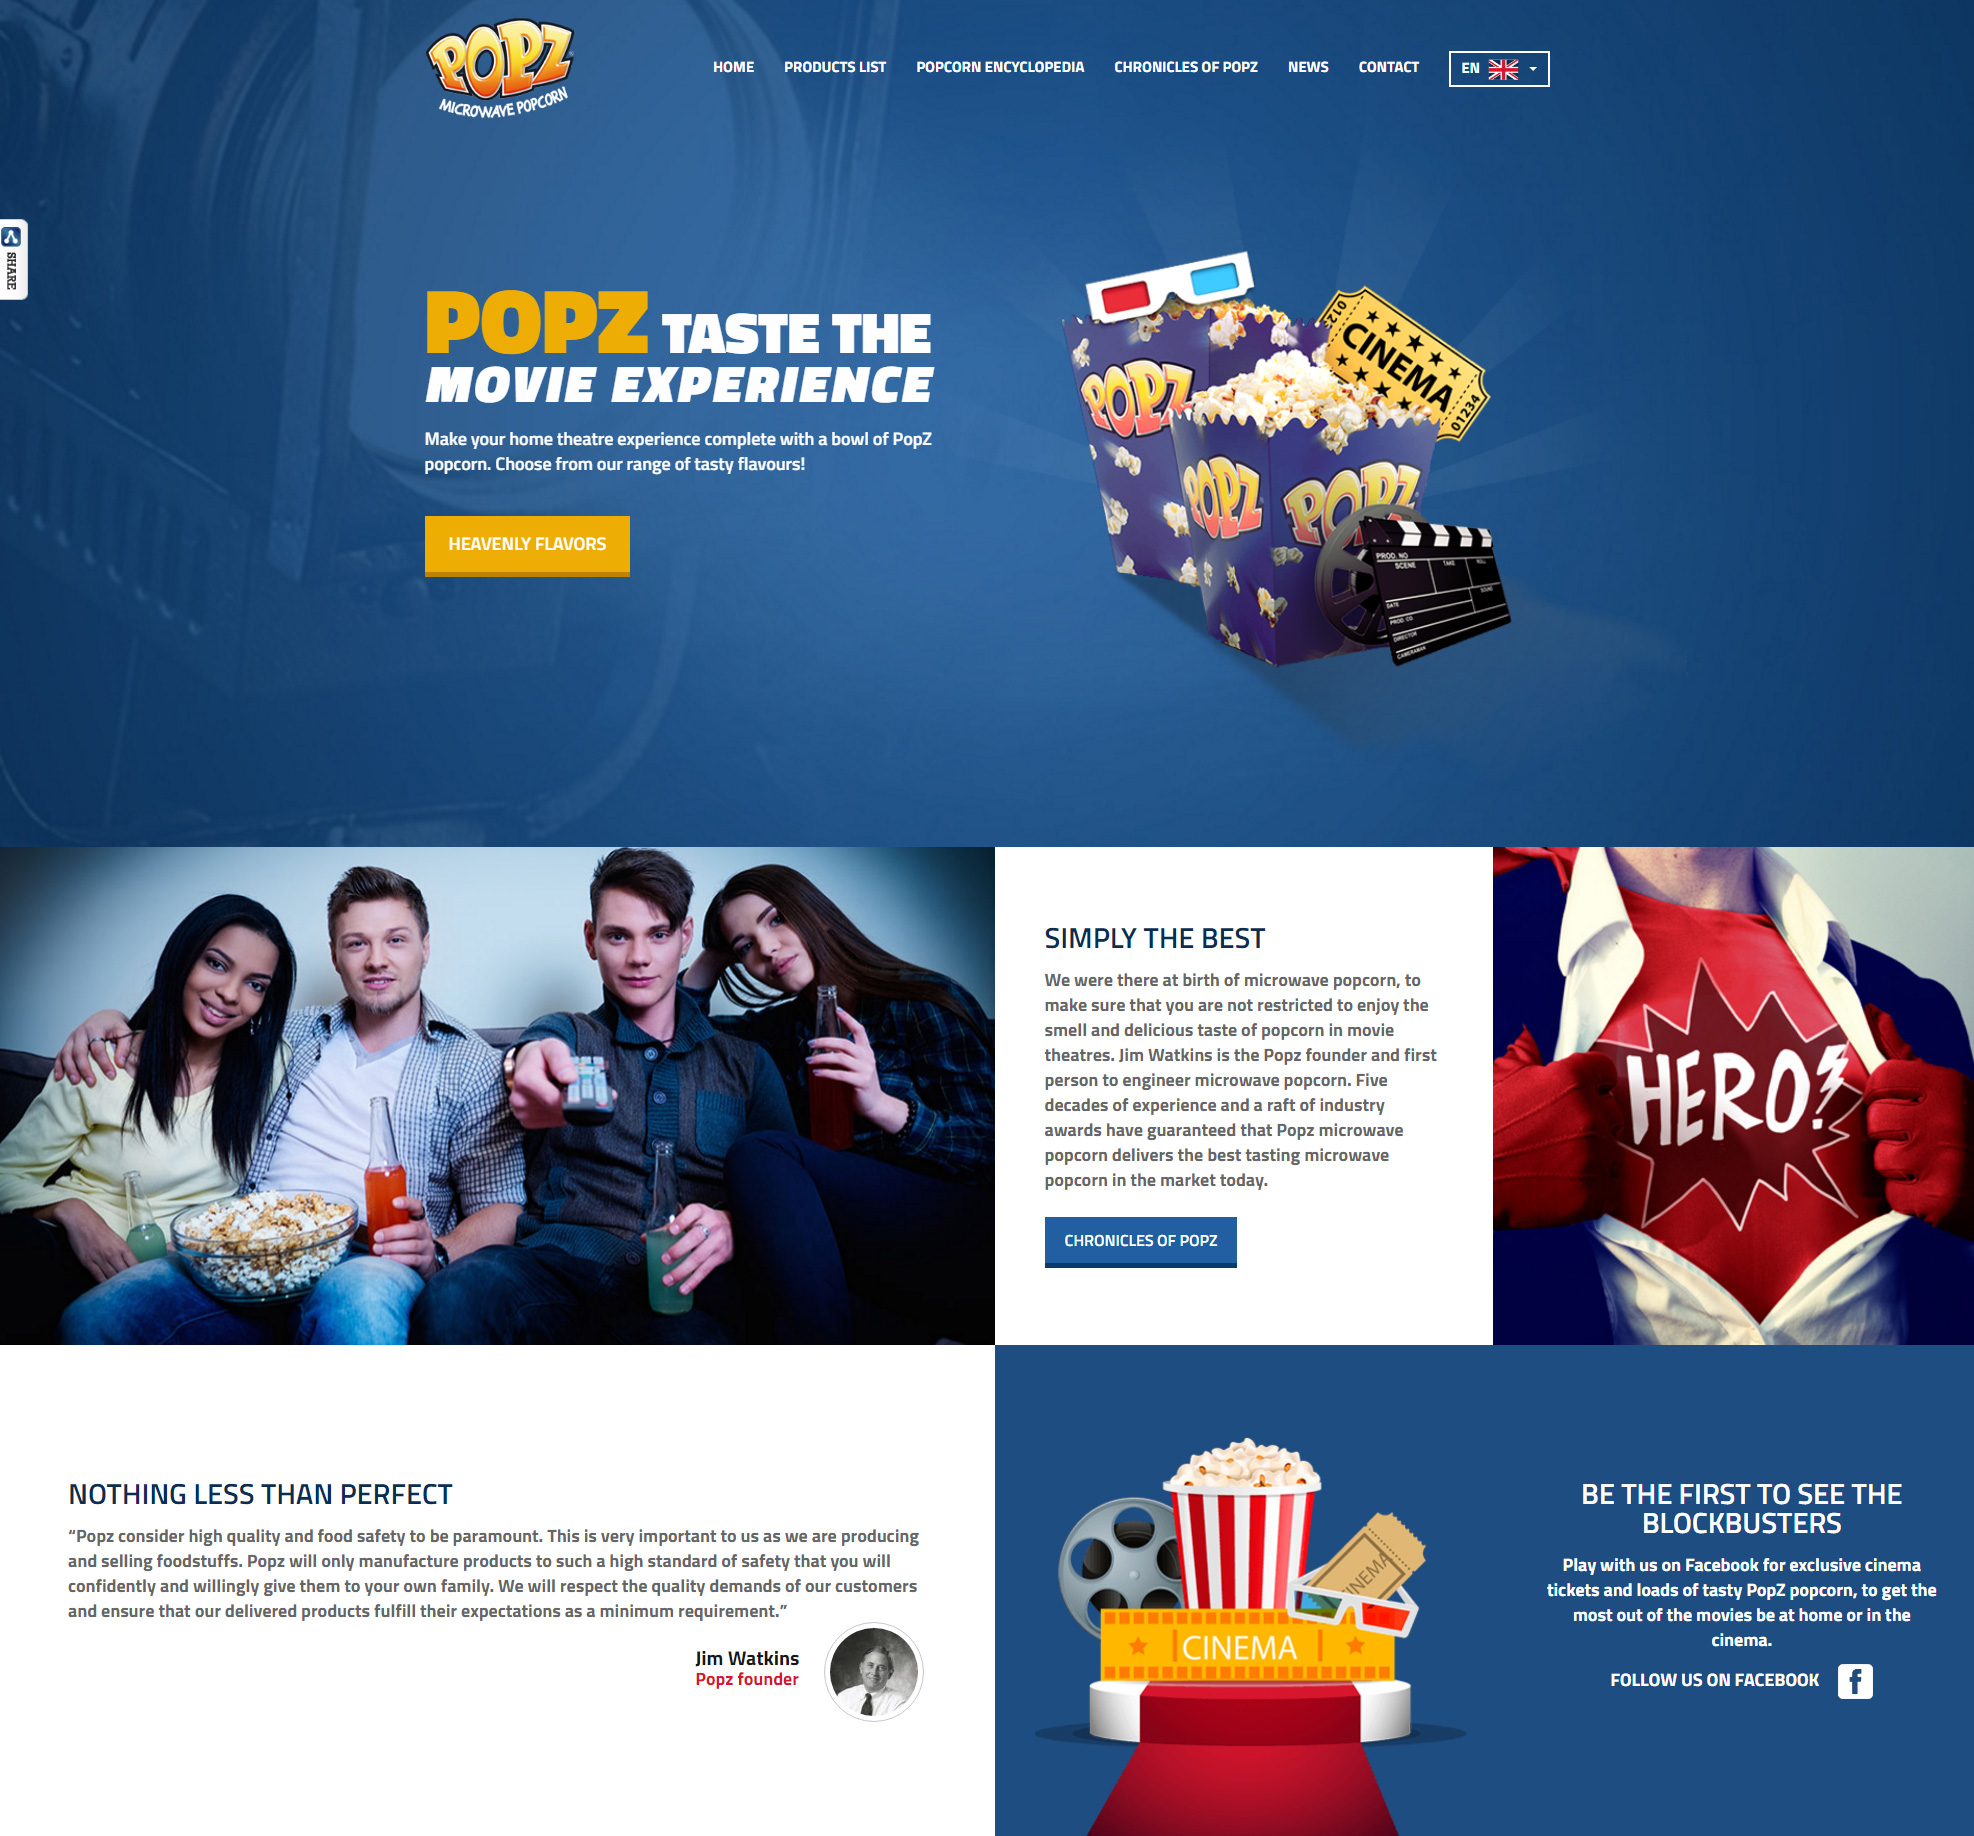 Popz launches new website